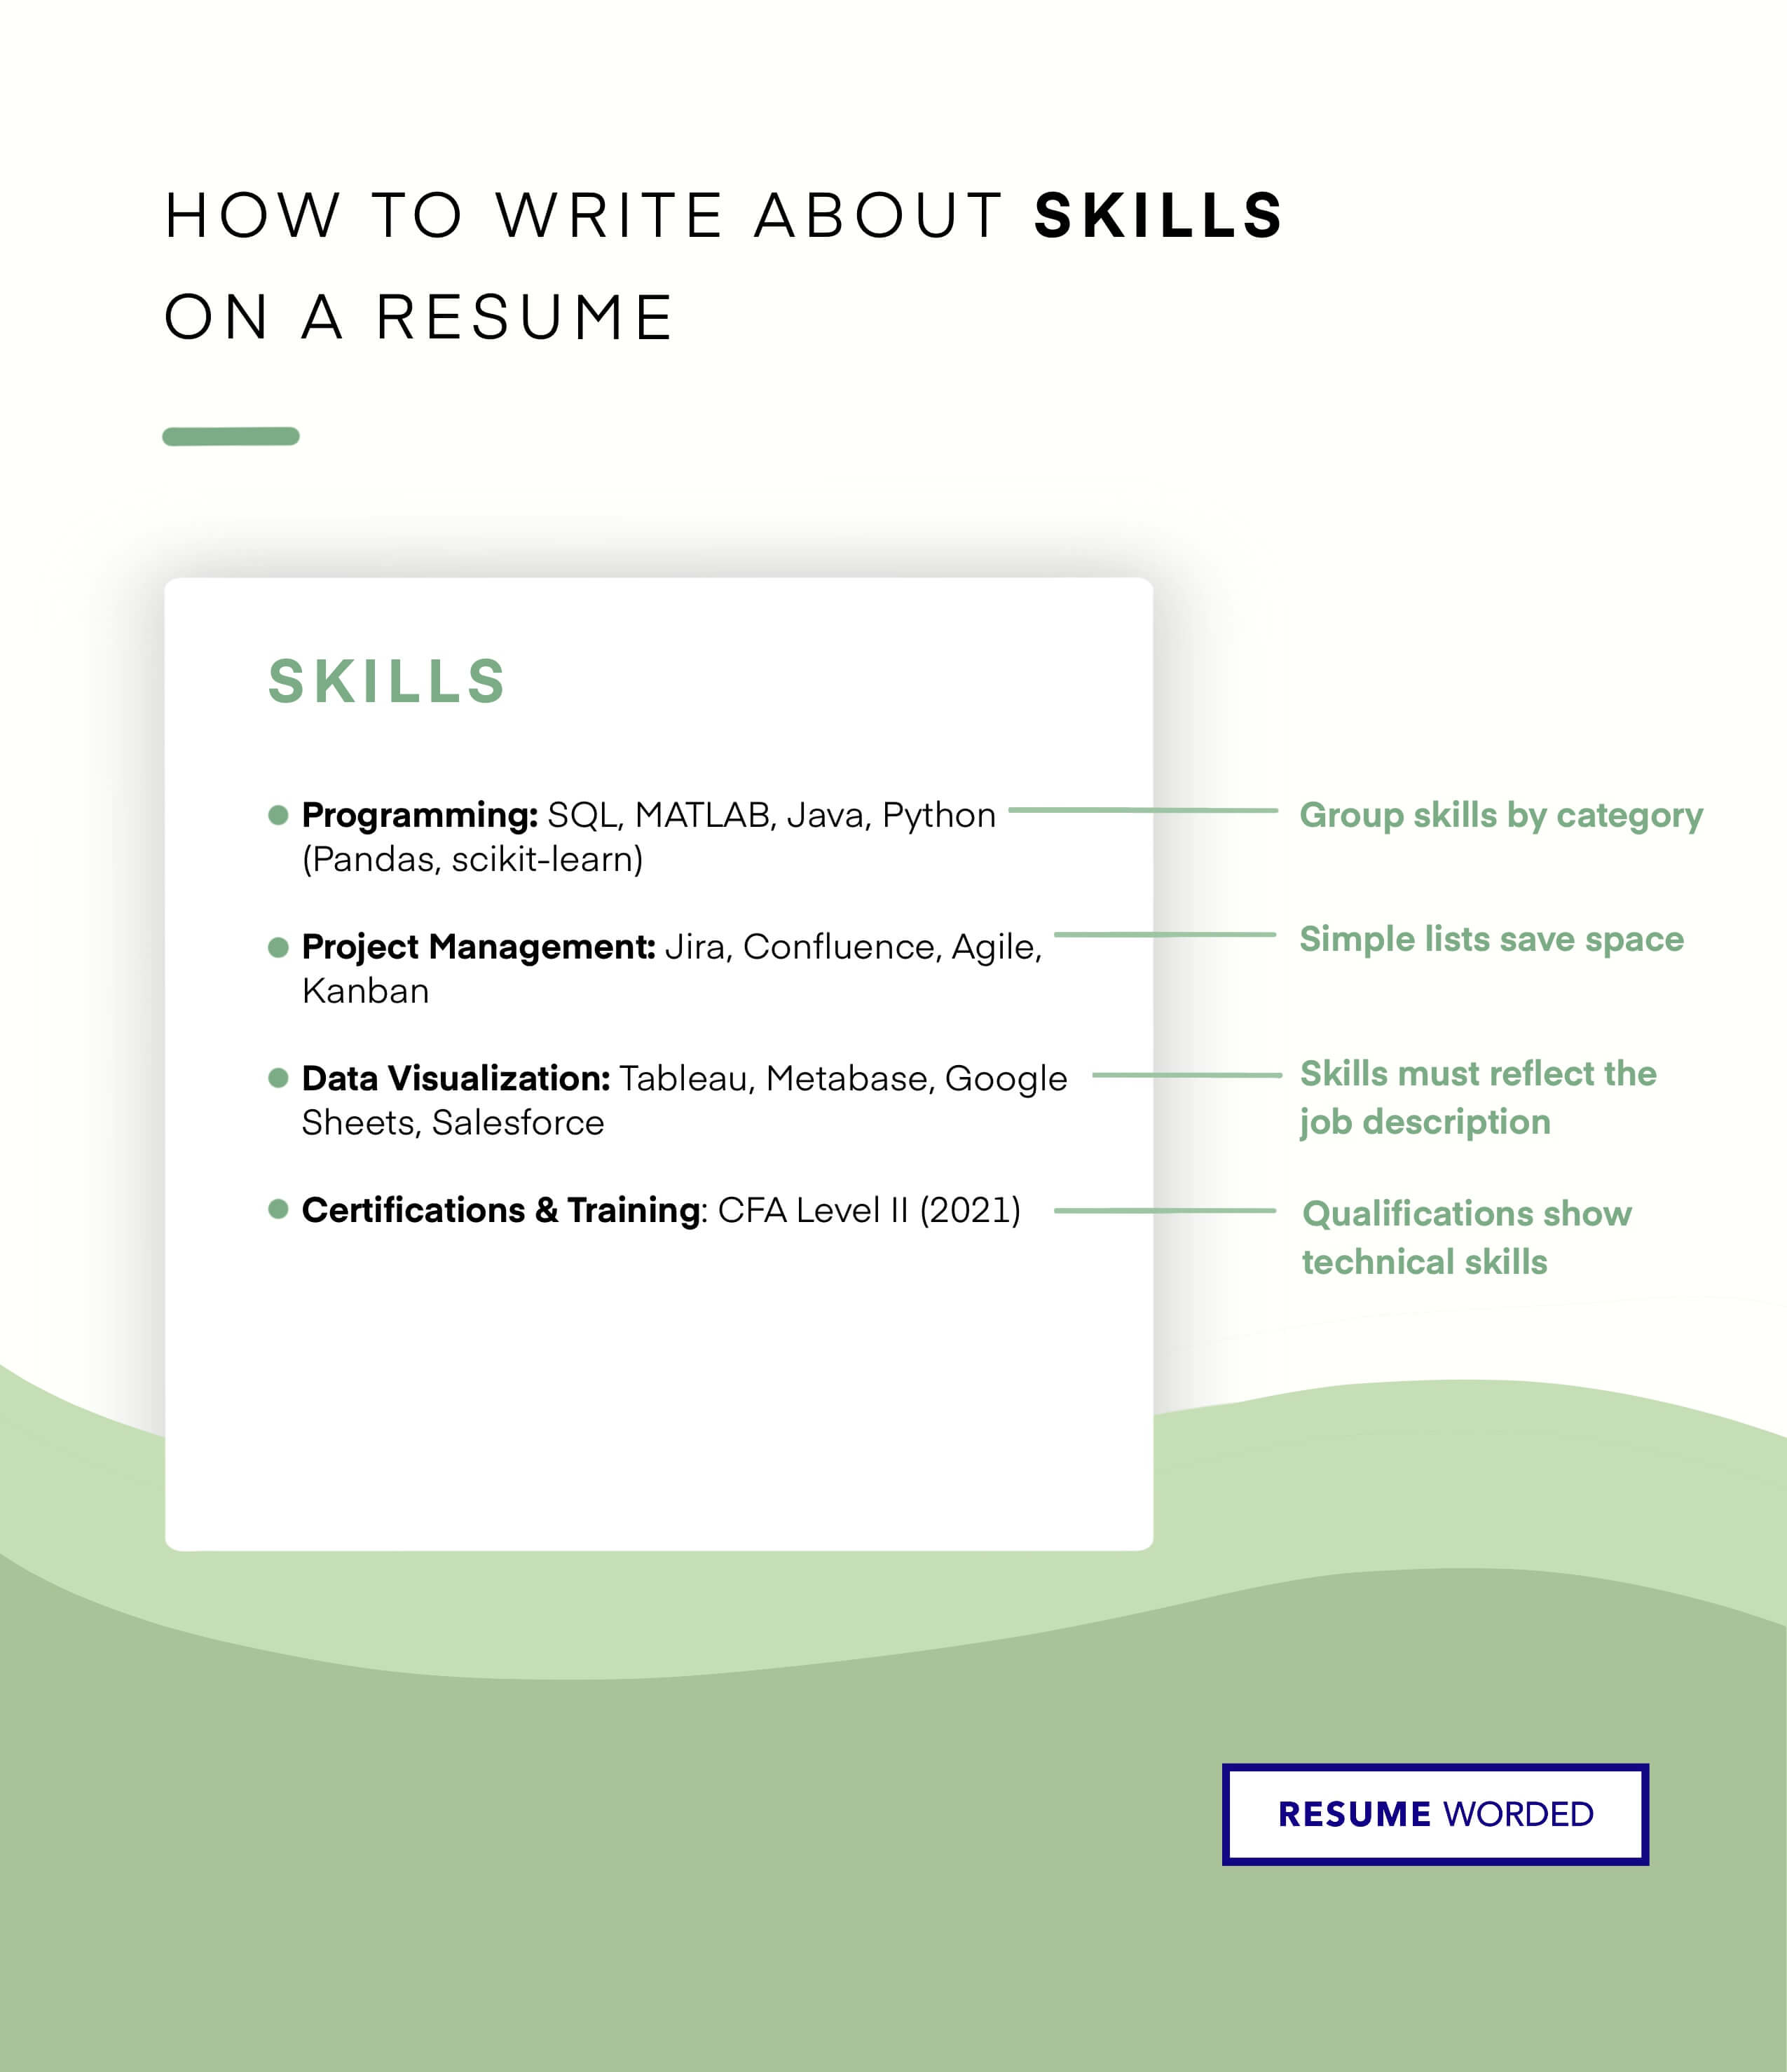 Evidence of your people skills - Entry-Level Recruiter CV